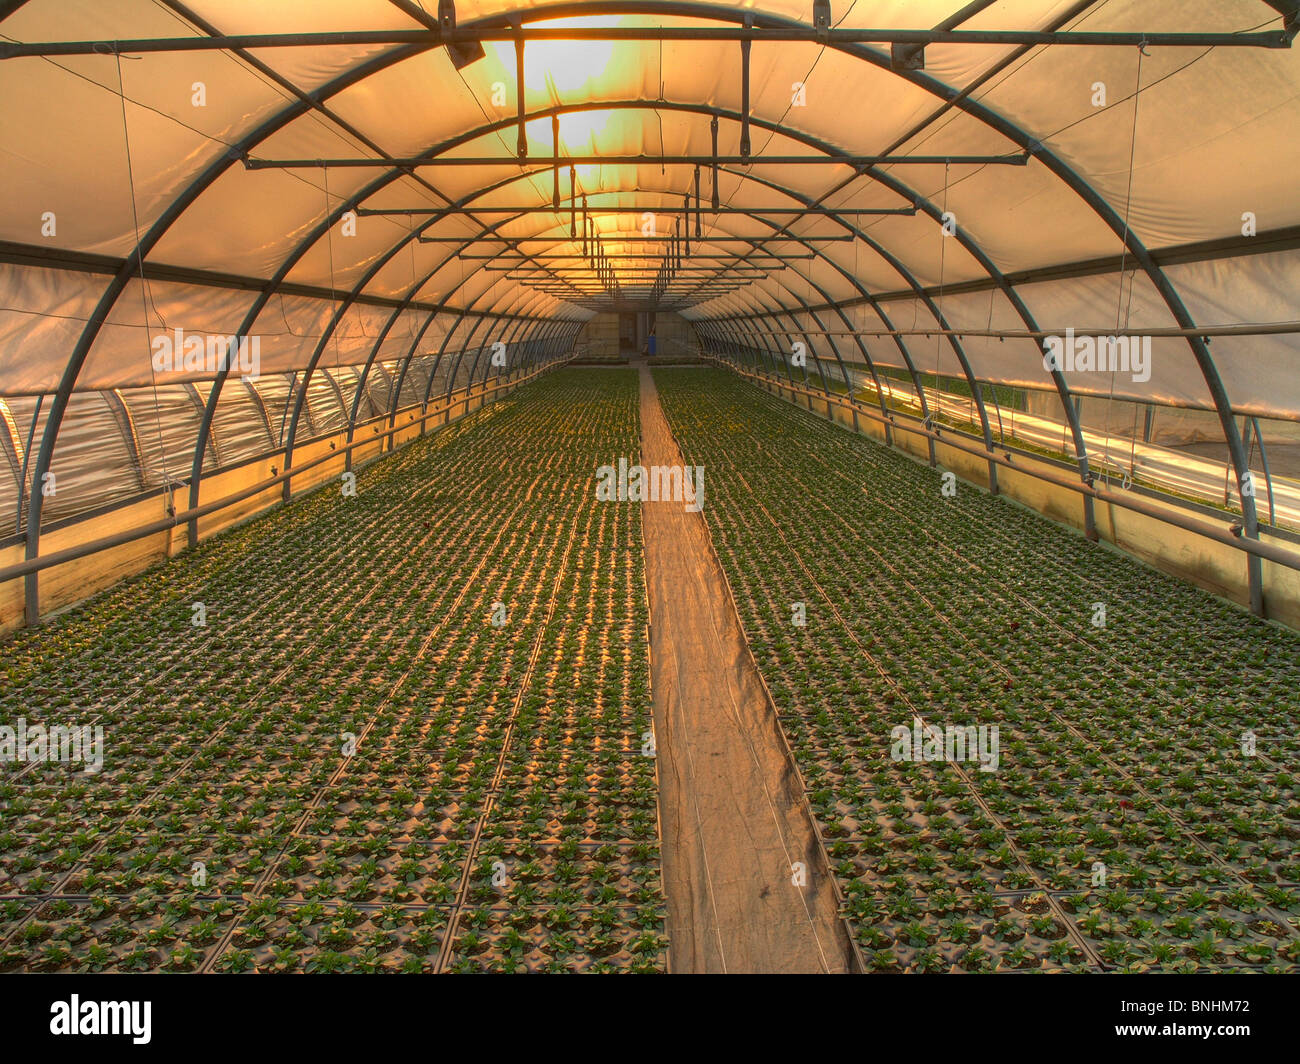 Switzerland greenhouse green house indoors inside plants cultivation agriculture sun sunset sunrise Stock Photo